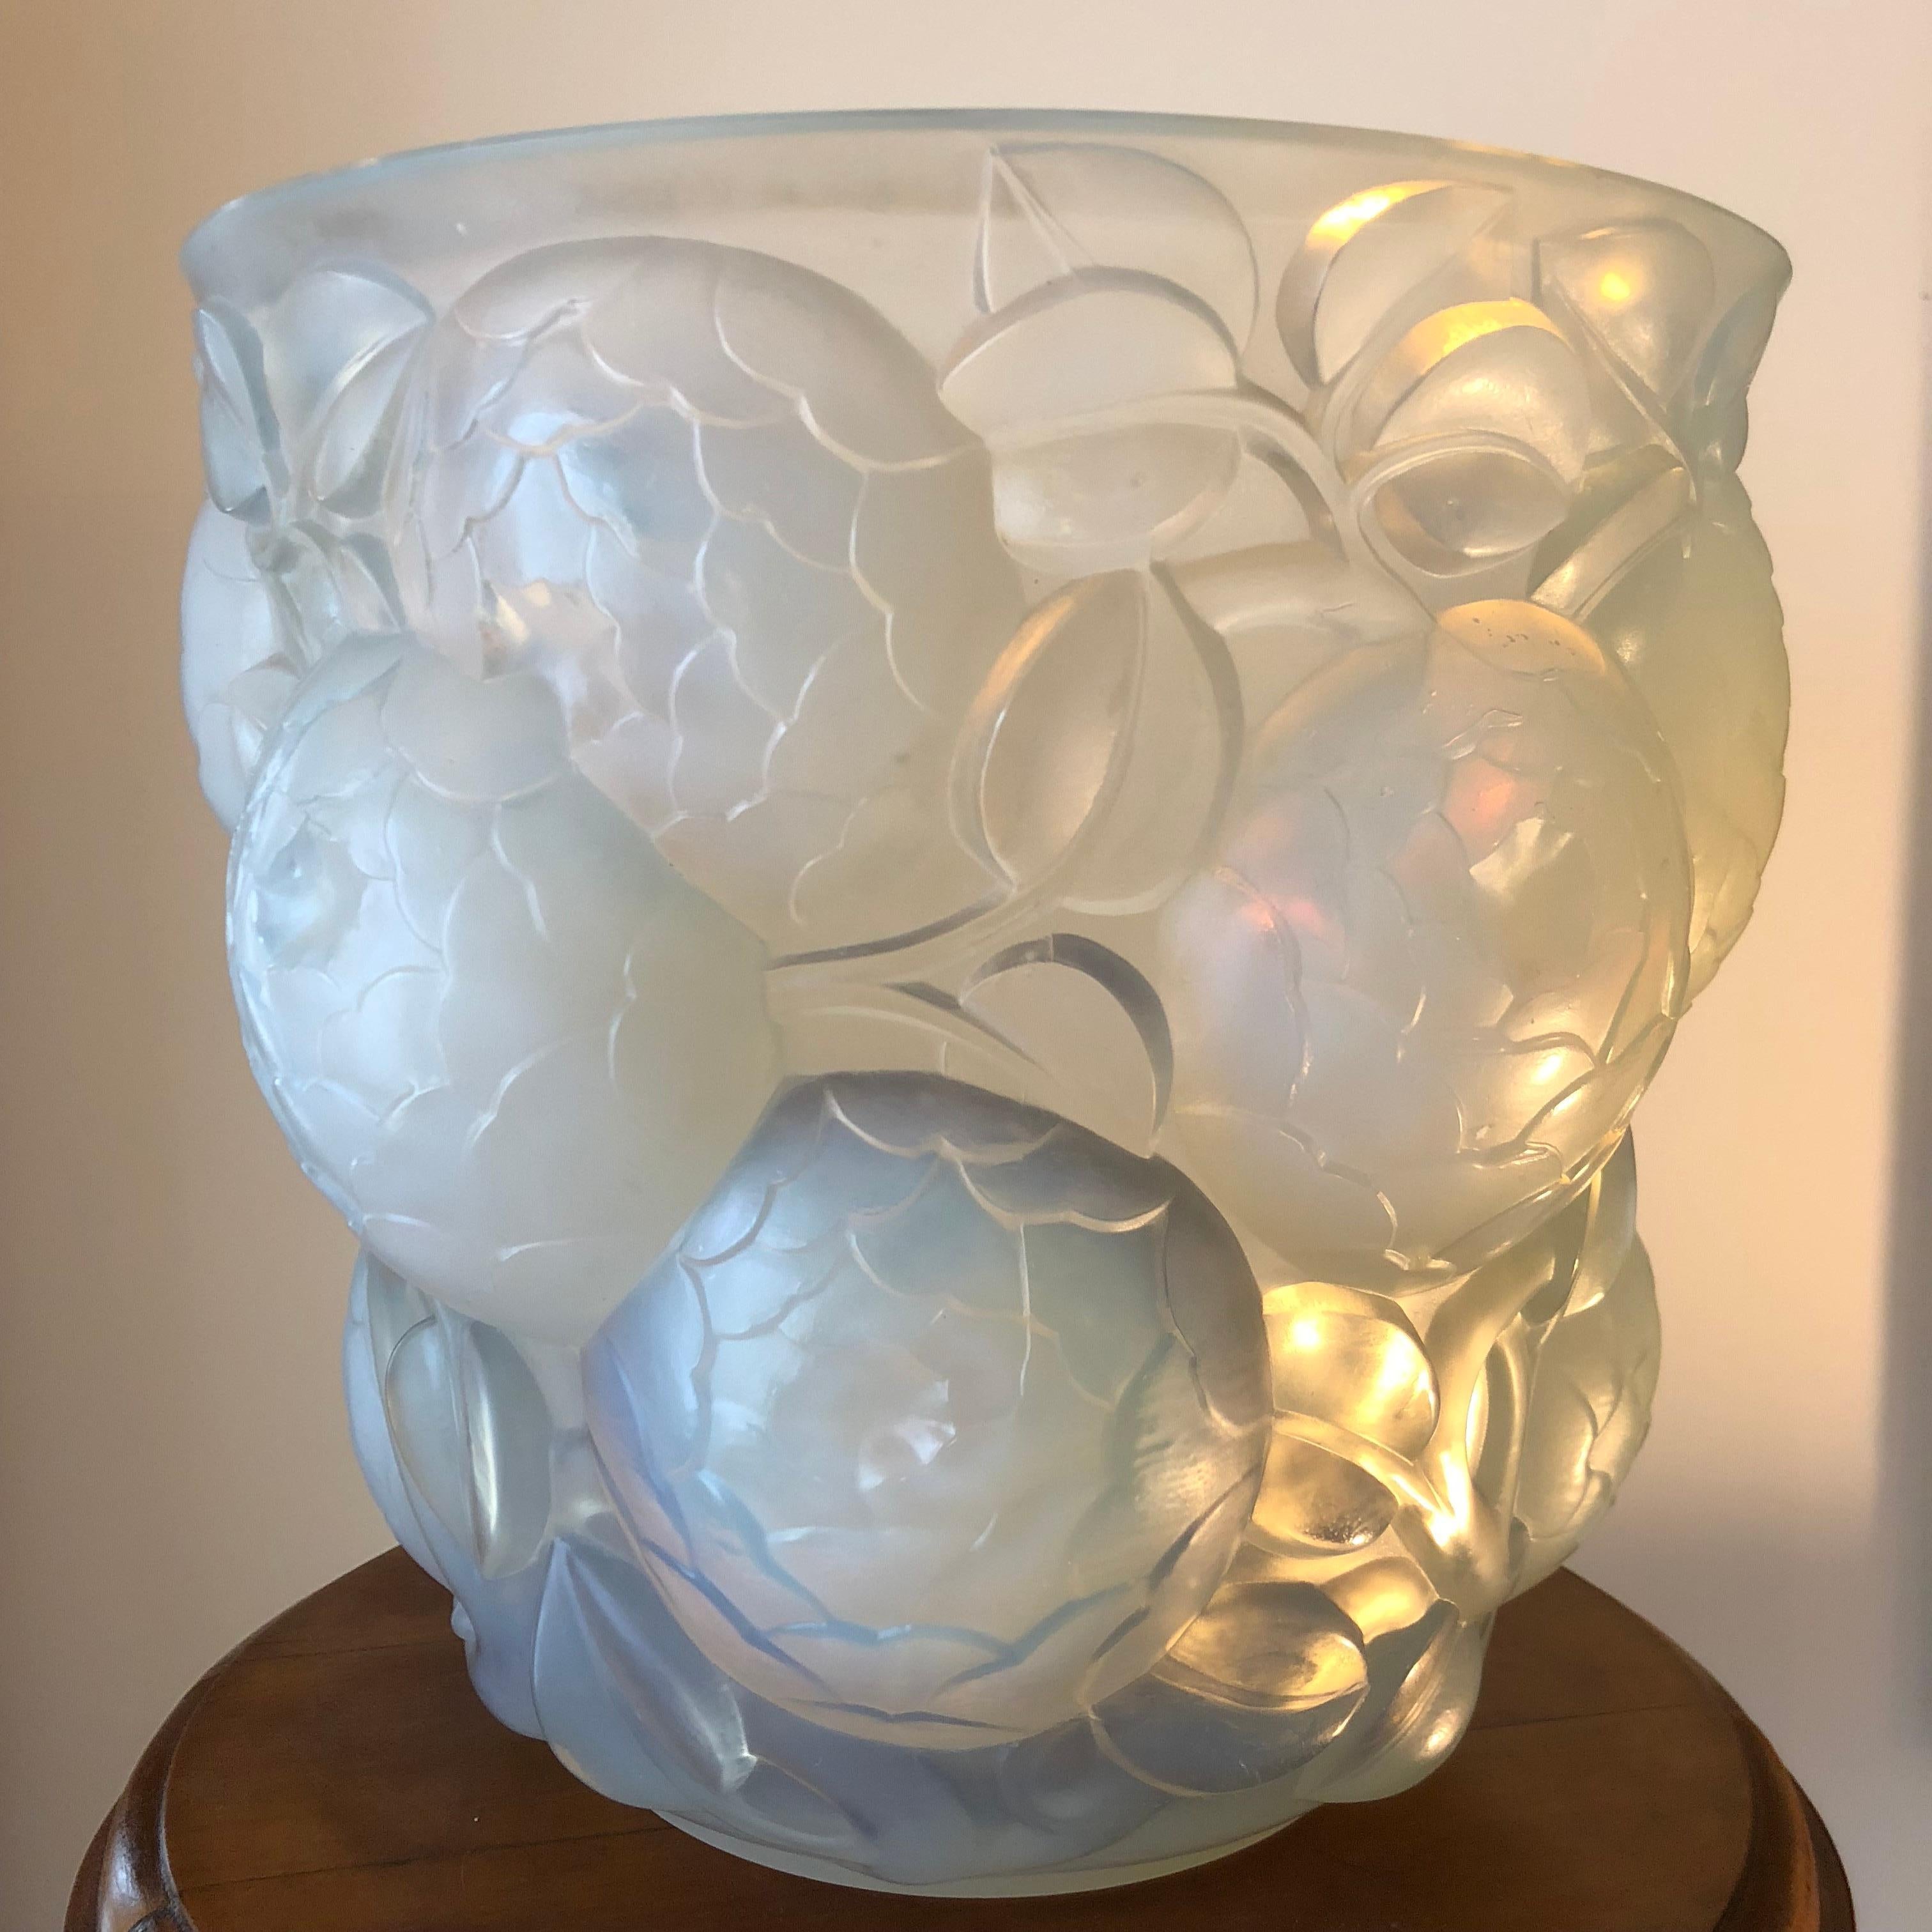 Early 20th Century 1927 Rene Lalique Oran Vase in Opalescent Glass